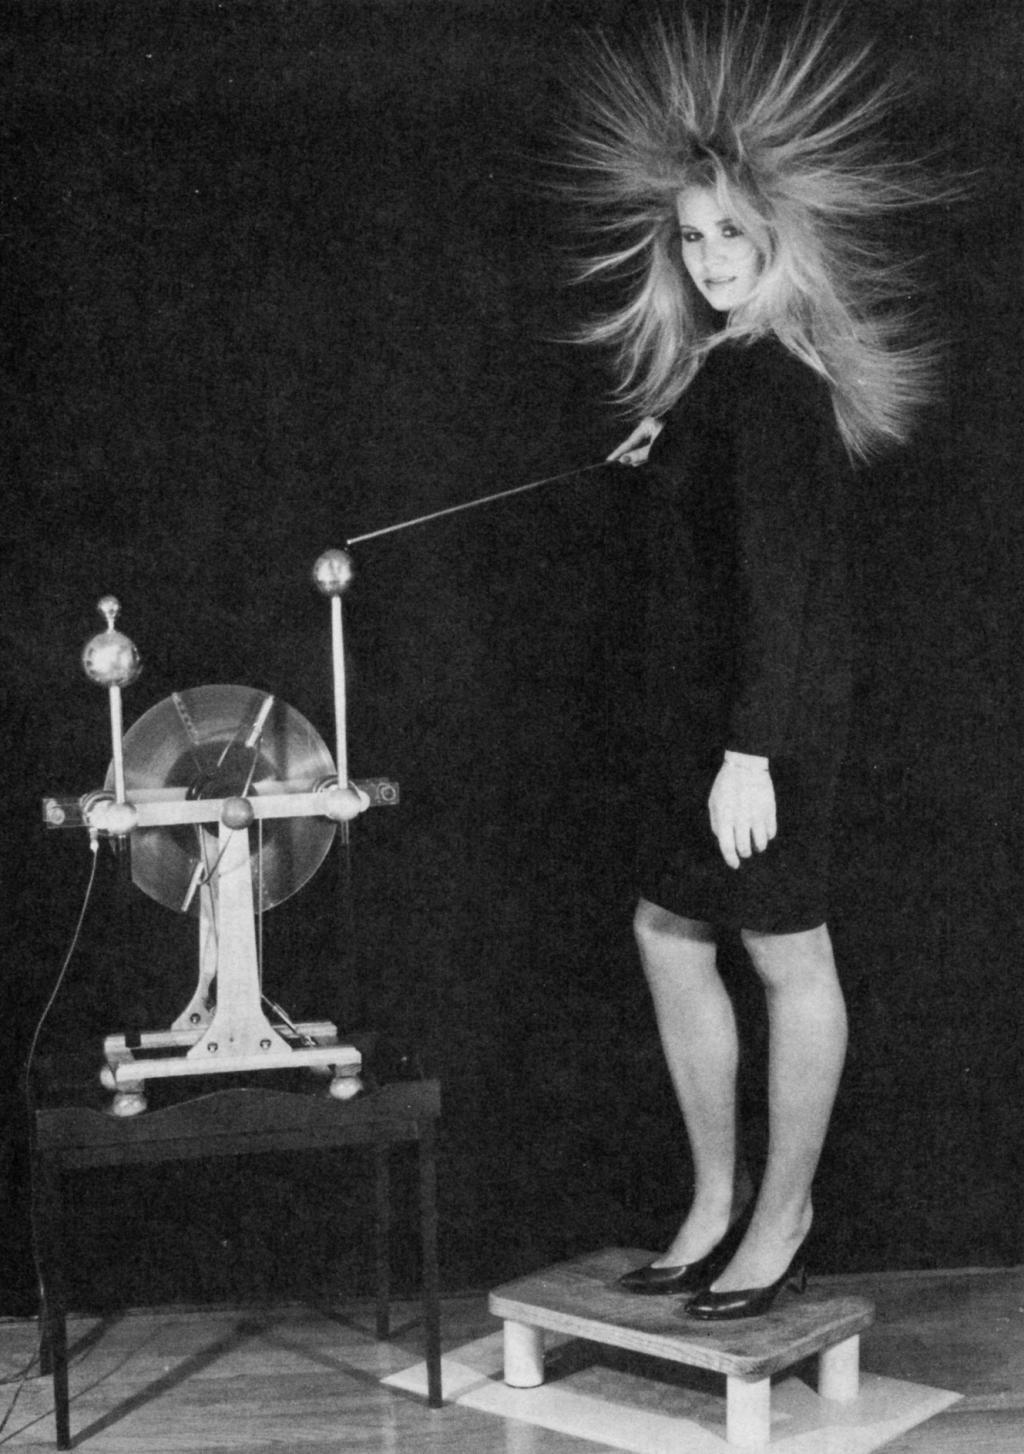 Girl with electrostatic charged hair from Wimshurst machine.